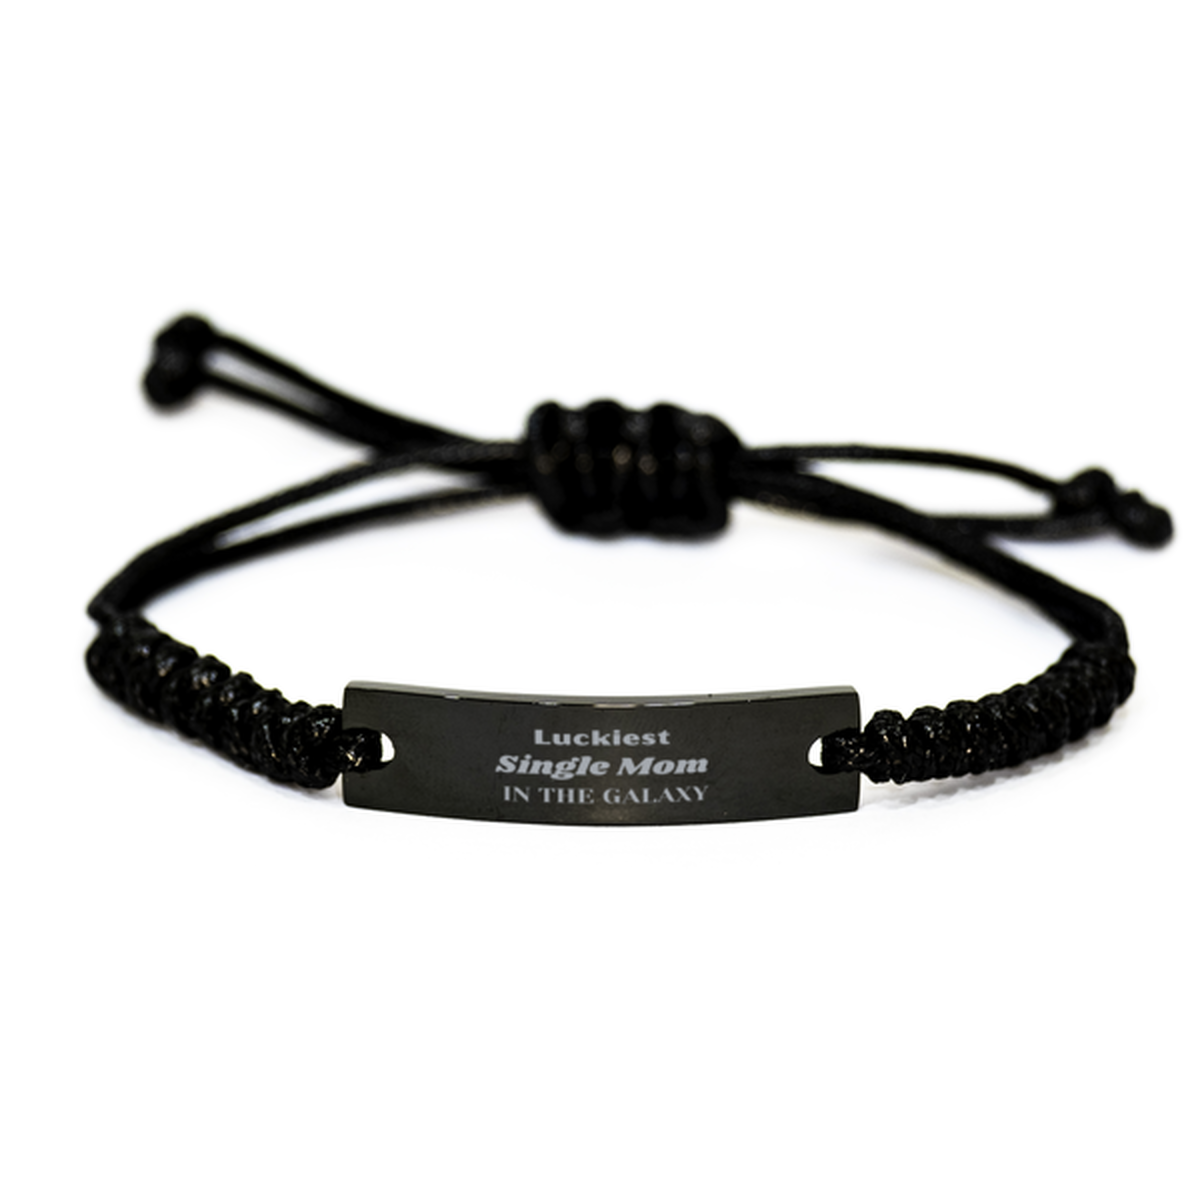 Luckiest Single Mom in the Galaxy, To My Single Mom Engraved Gifts, Christmas Single Mom Black Rope Bracelet Gifts, X-mas Birthday Unique Gifts For Single Mom Men Women